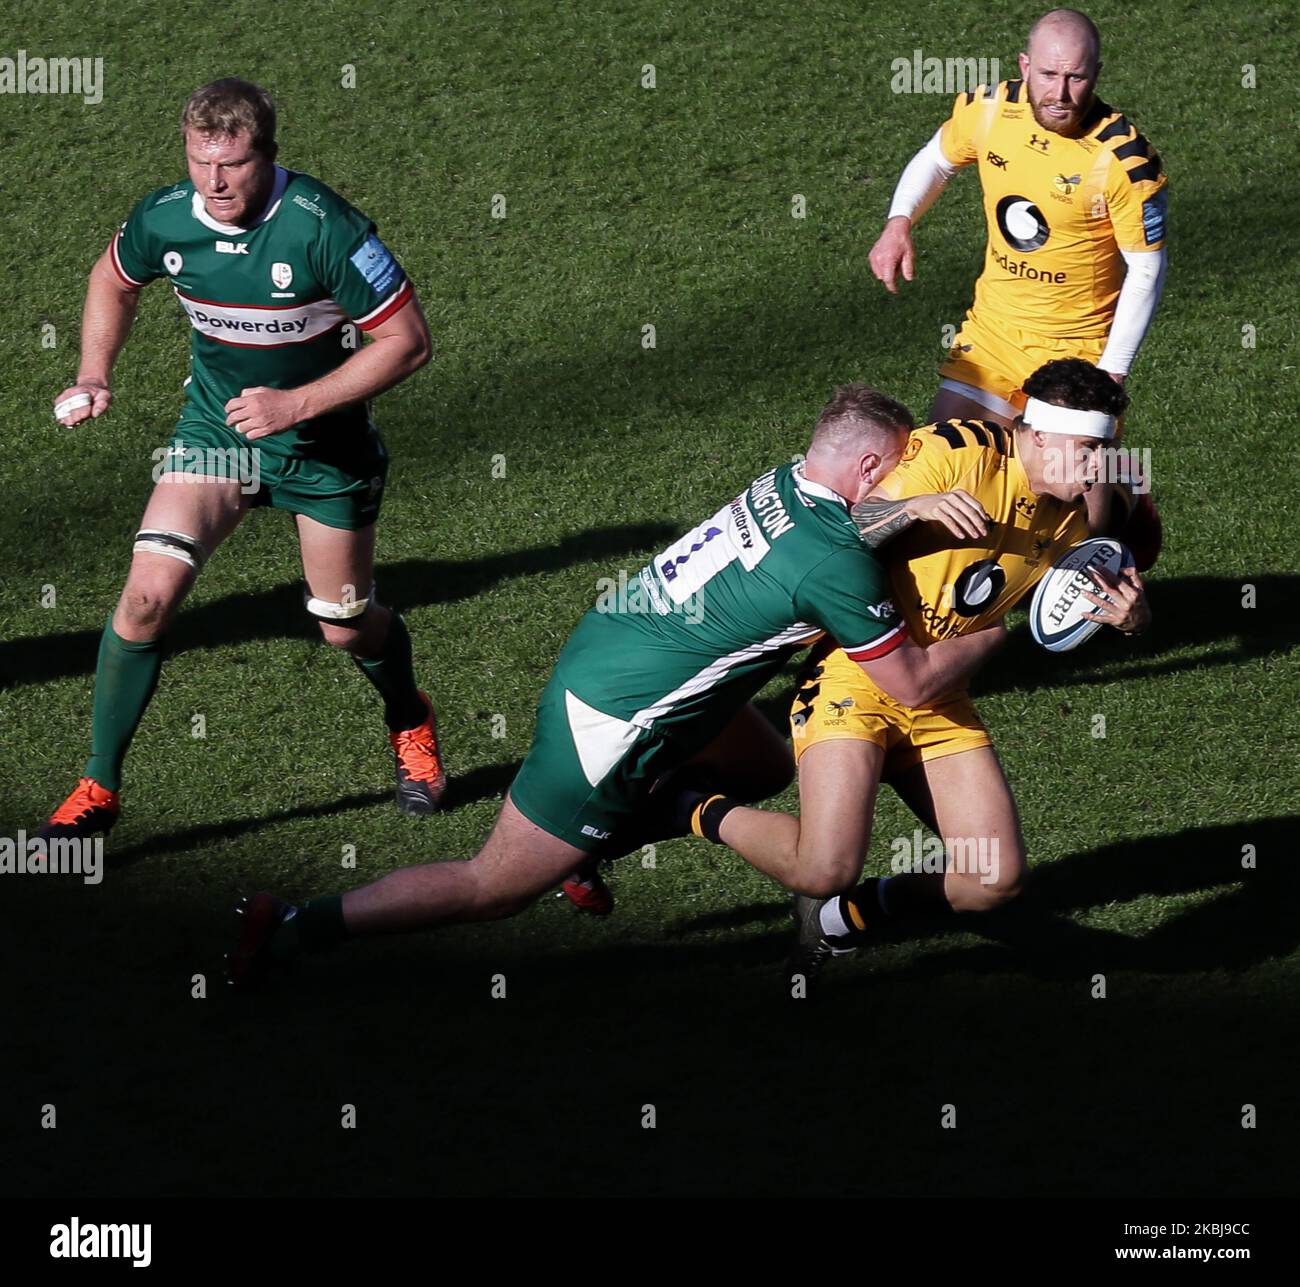 Will Rowlands of Wasps Rugby getting tackled by Harry Elrington of London Irish during the Gallagher Premiership match between London Irish and London Wasps at the Madejski Stadium, Reading on Sunday 1st March 2020. (Photo by Jacques Feeney/MI News/NurPhoto) Stock Photo